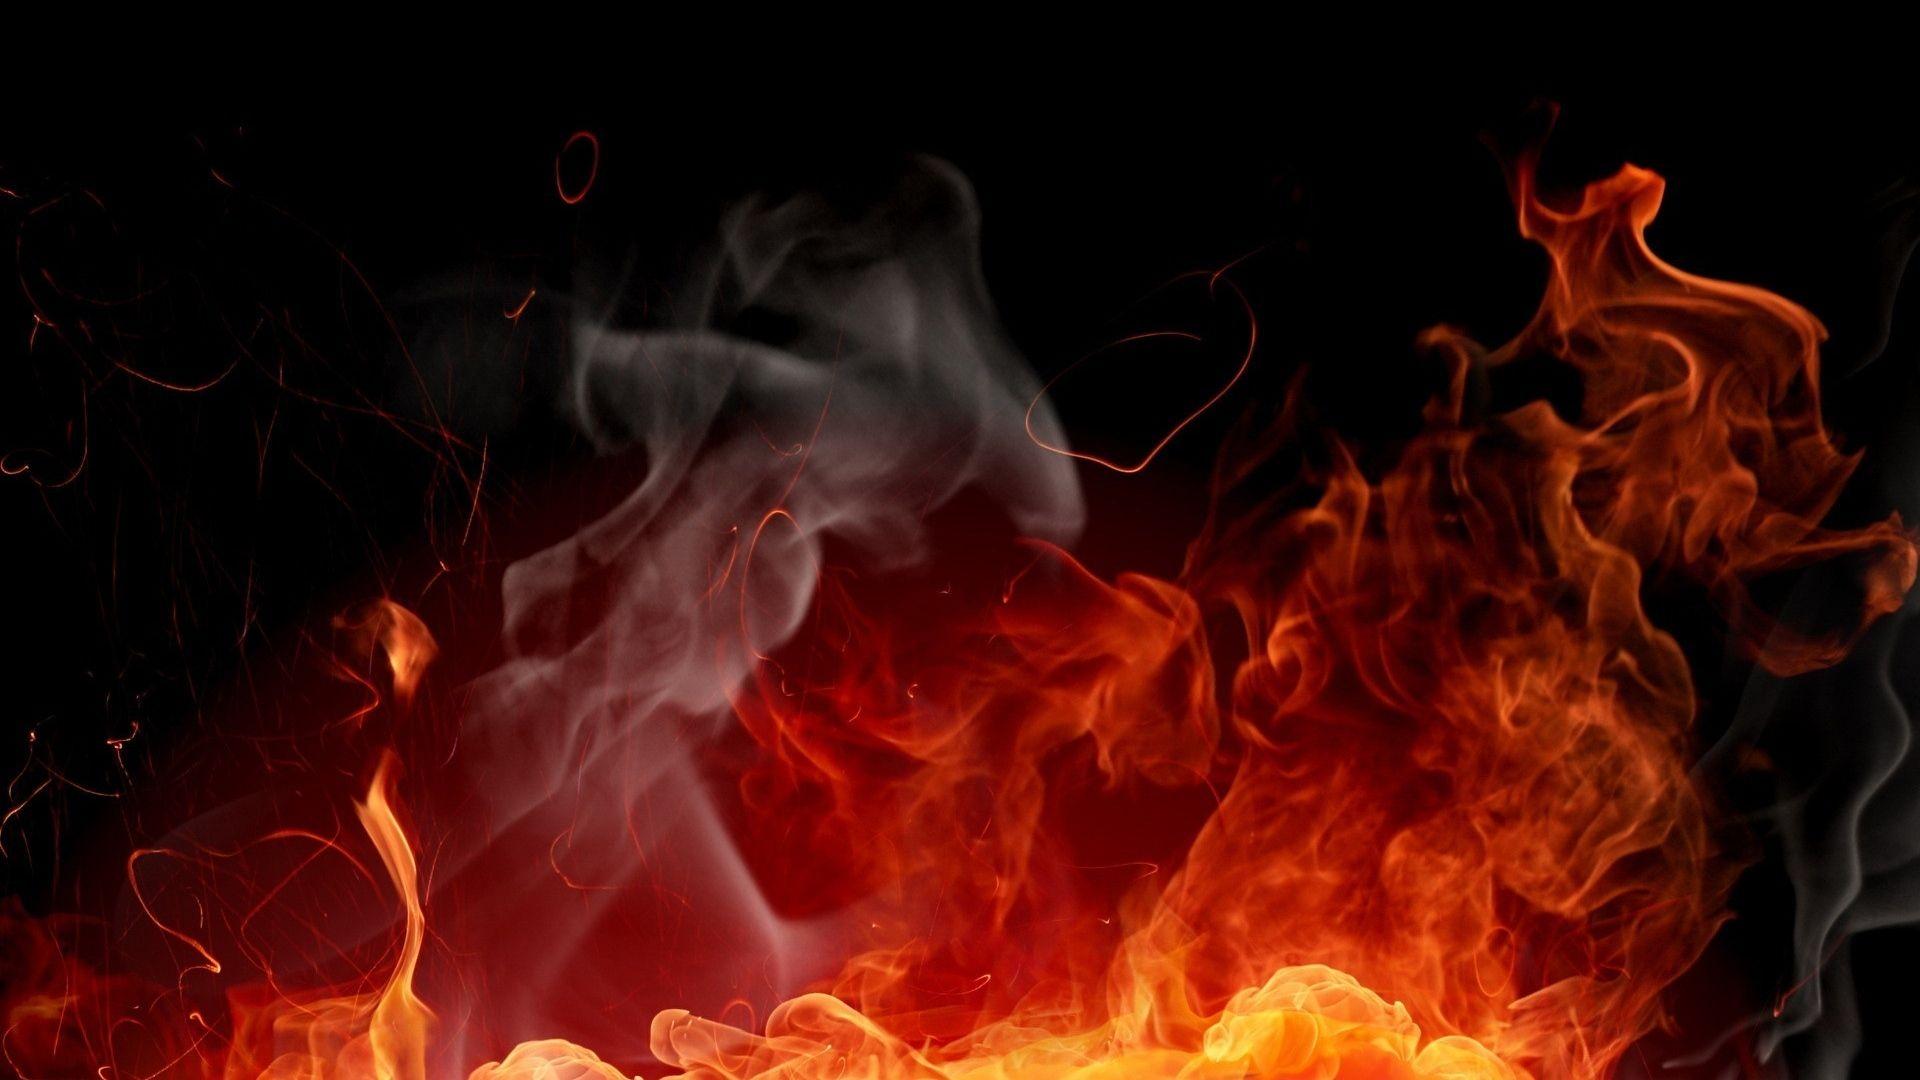 Download Wallpaper 1920x1080 fire, background, color, abstraction Full HD 1080p HD Background. Fire art, Wallpaper gallery, Smoke background